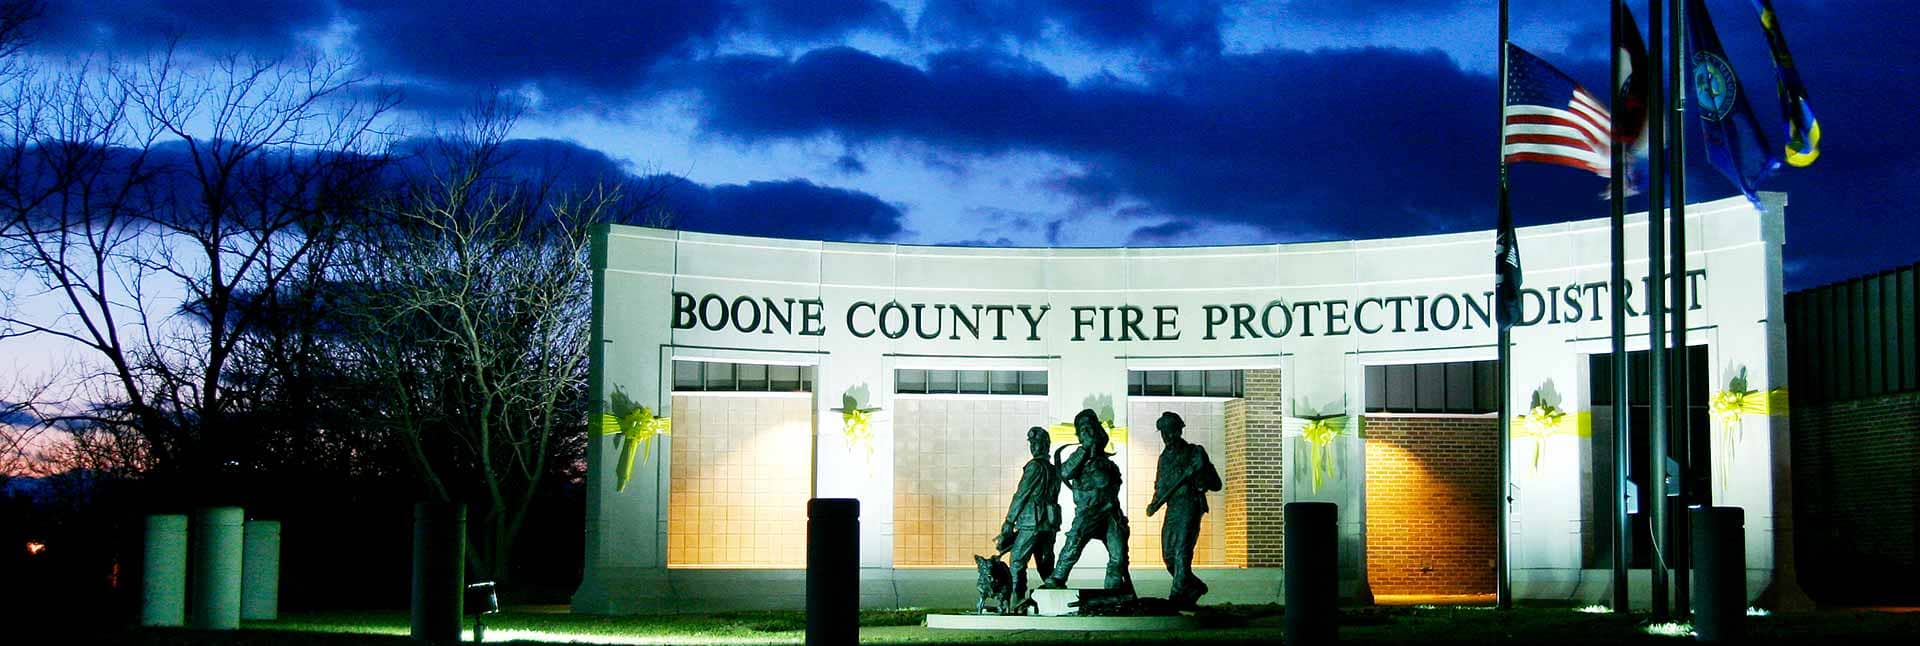 Boone County Fire Protection-Admin-Plaza